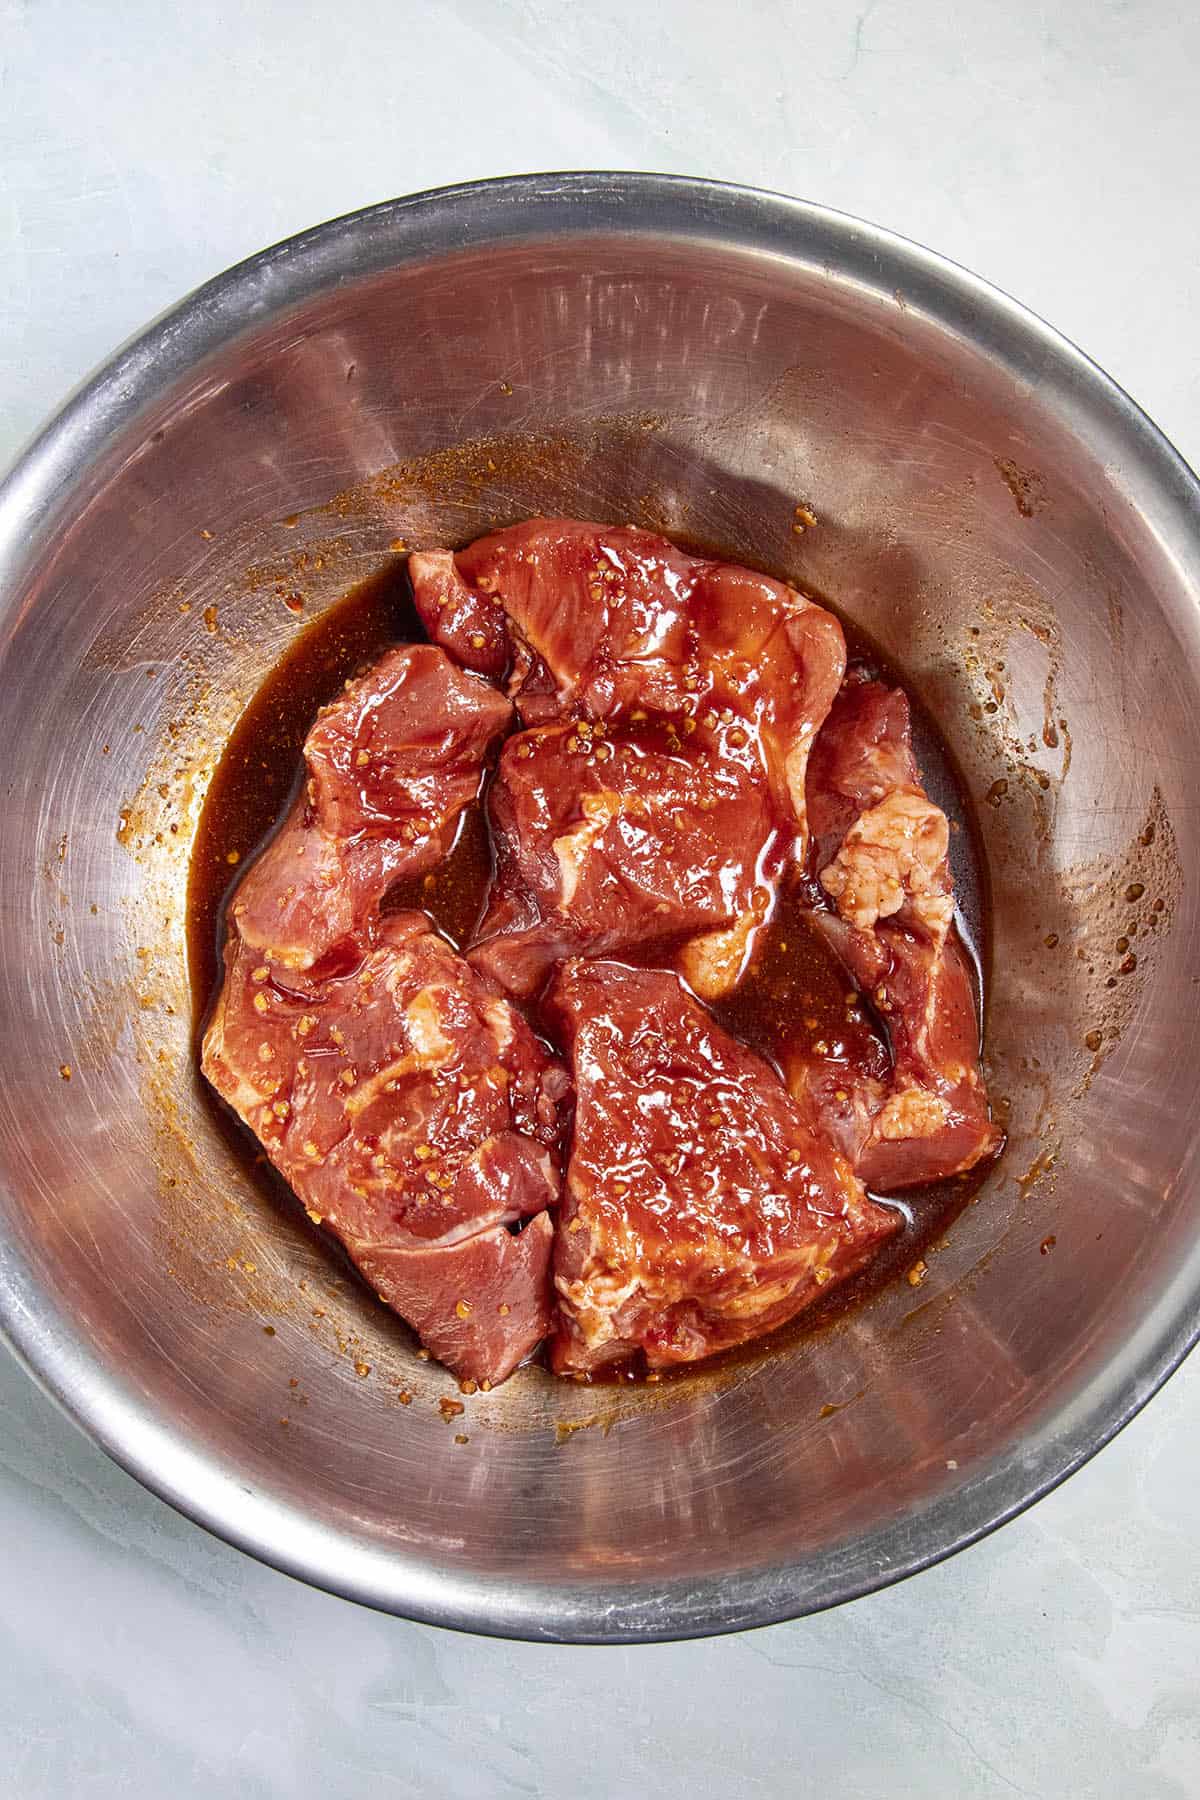 Marinating the chunks of pork in a bowl